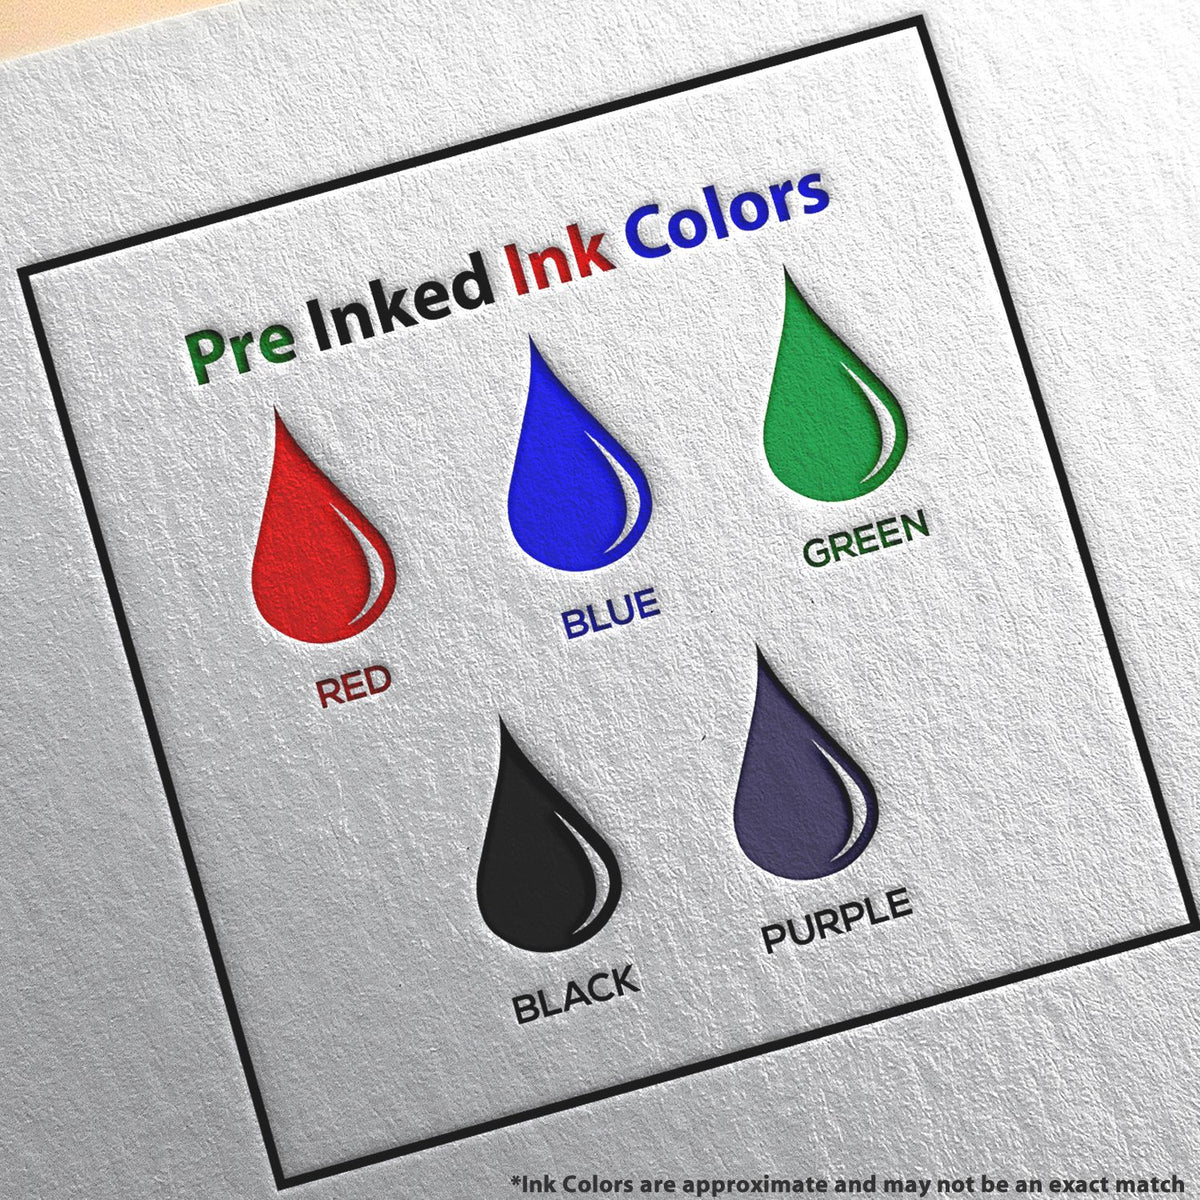 A picture showing the different ink colors or hues available for the Slim Pre-Inked Kansas Land Surveyor Seal Stamp product.